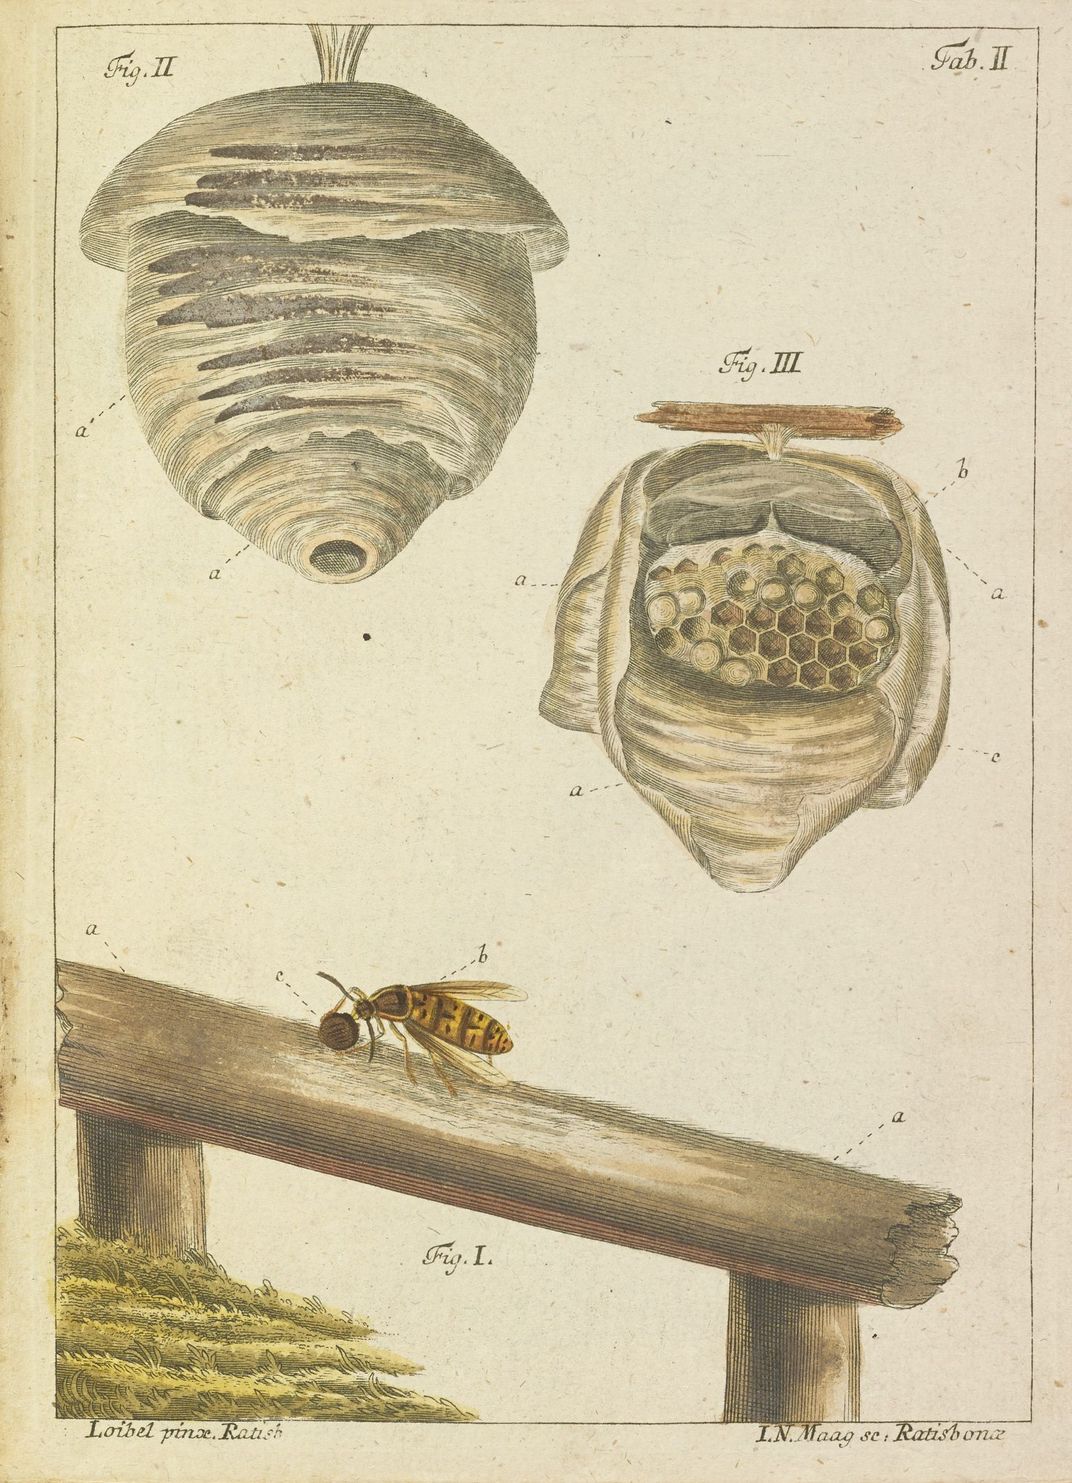 18th century book illustration of two wasps nests and a wasp on a piece of wood.